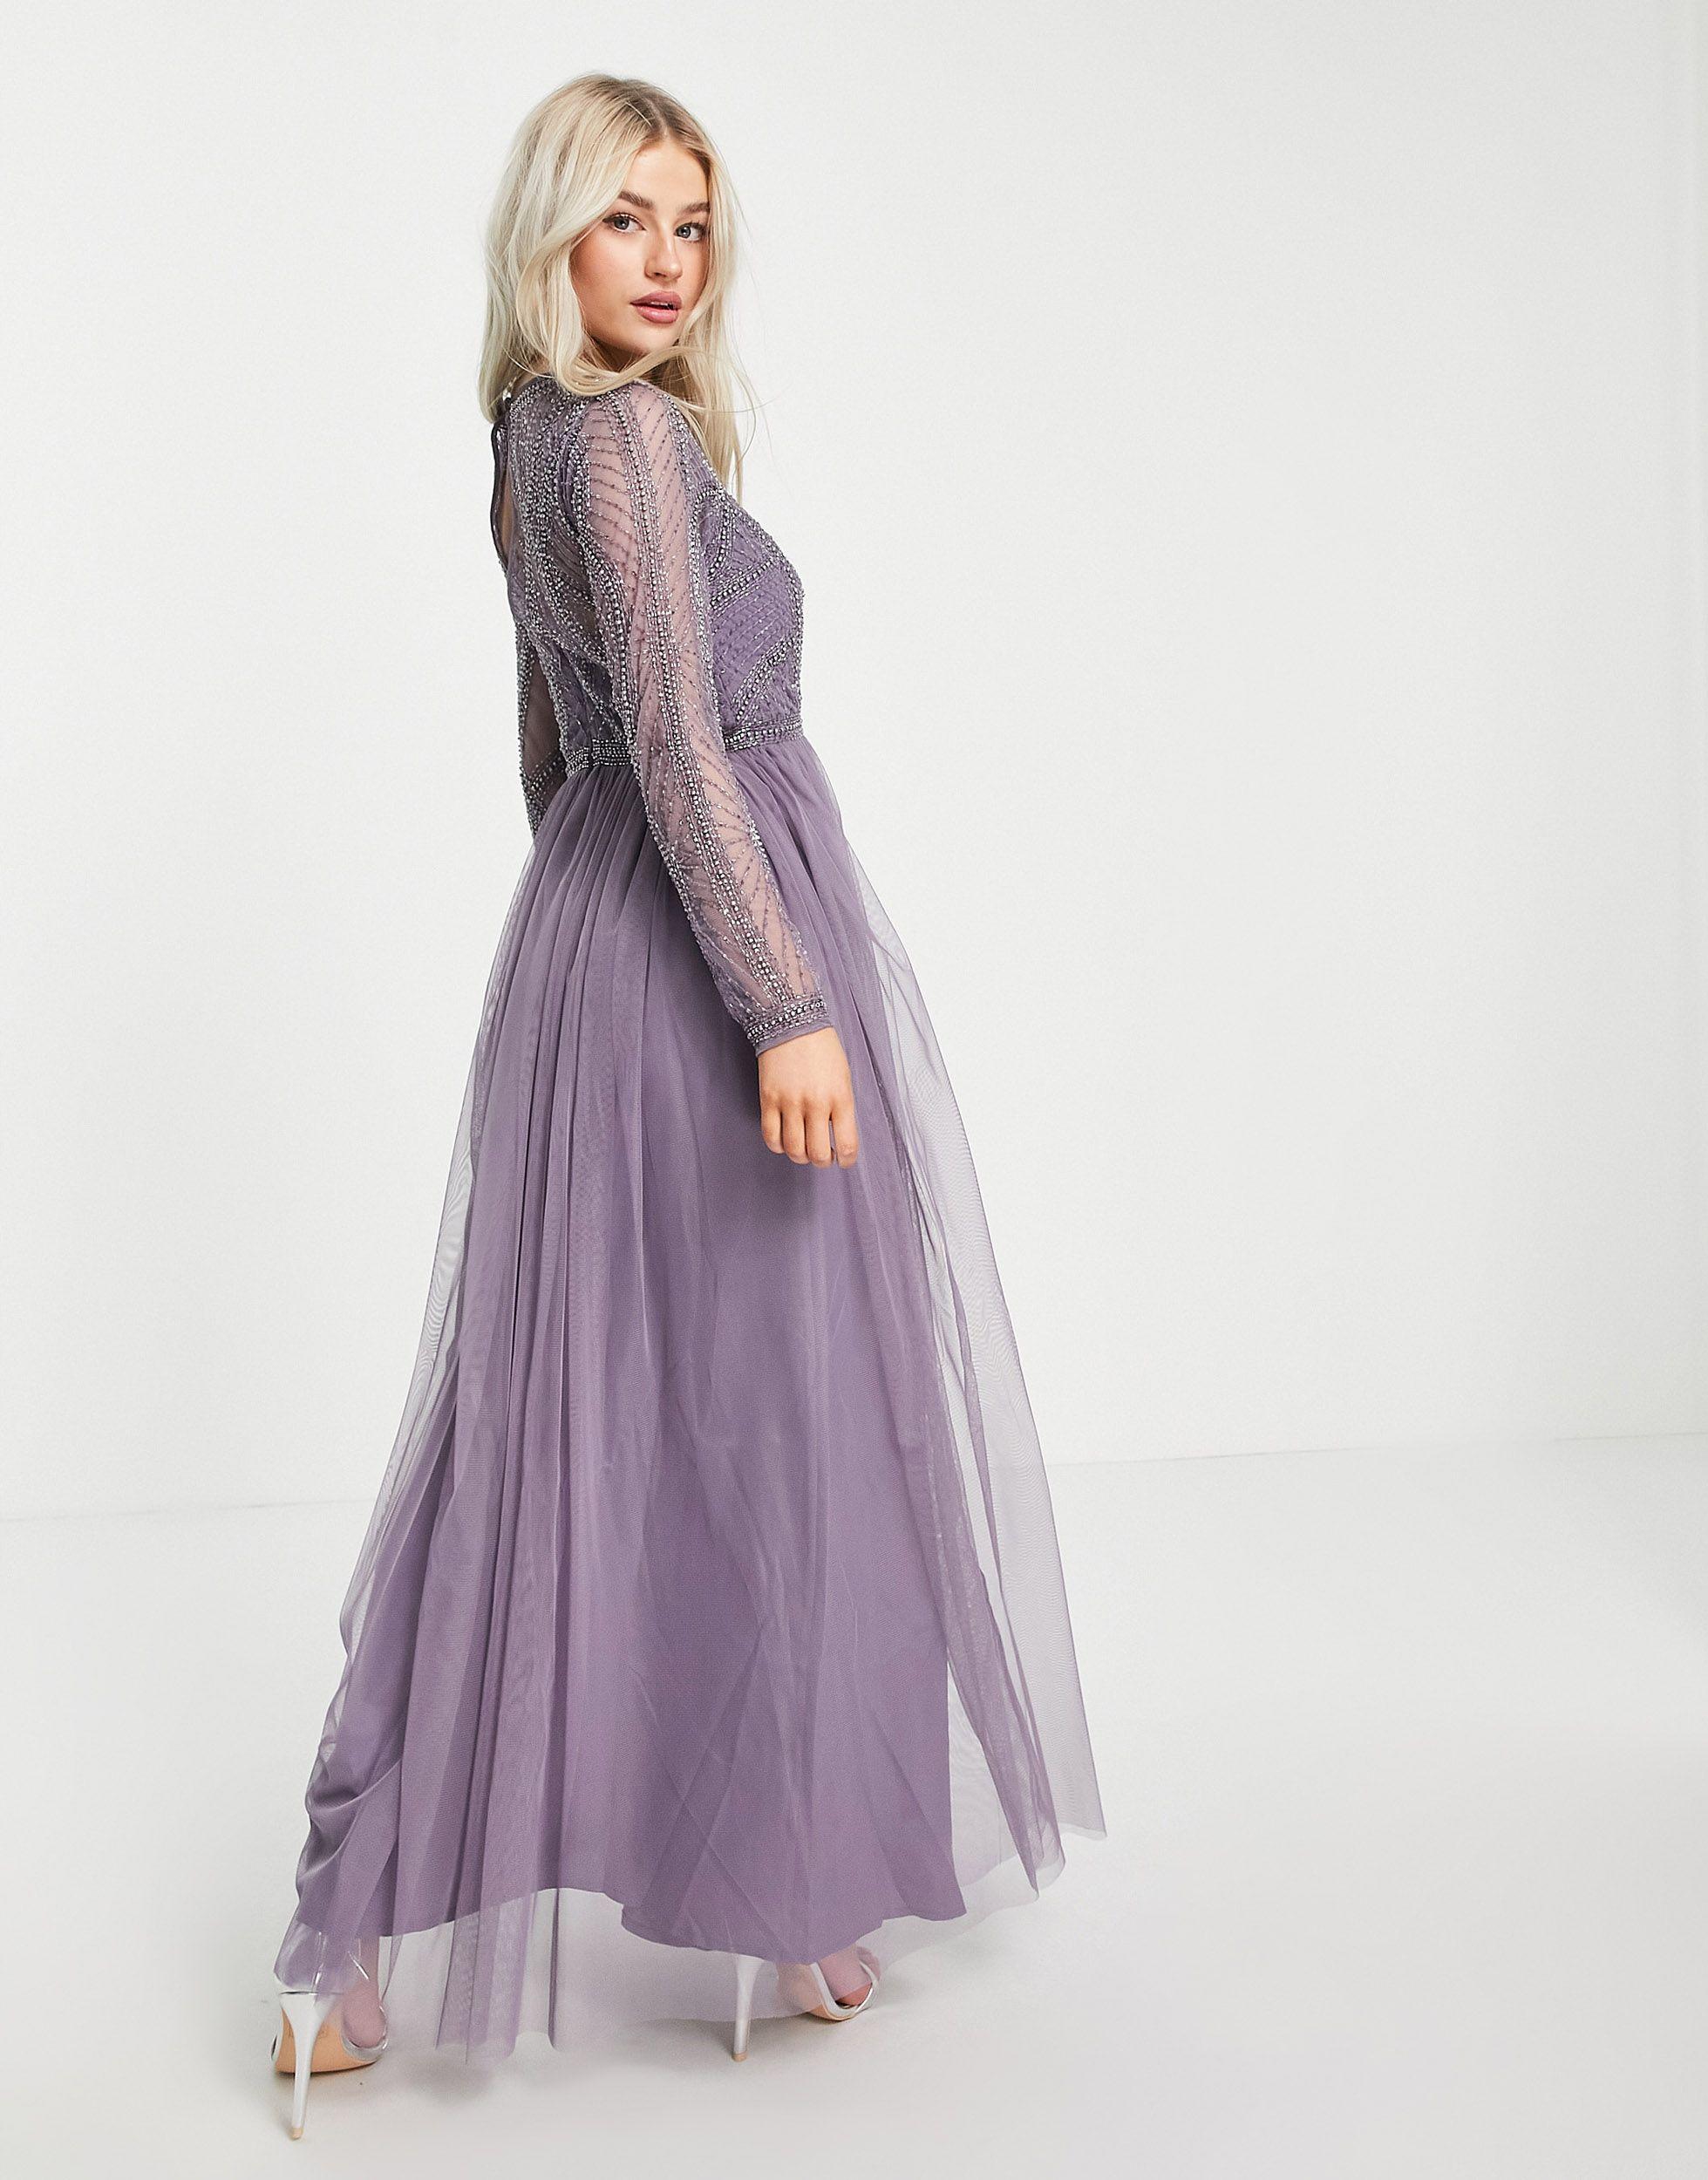 ASOS Asos Design Petite Embellished Bodice Maxi Dress With Tulle Skirt in  Purple | Lyst